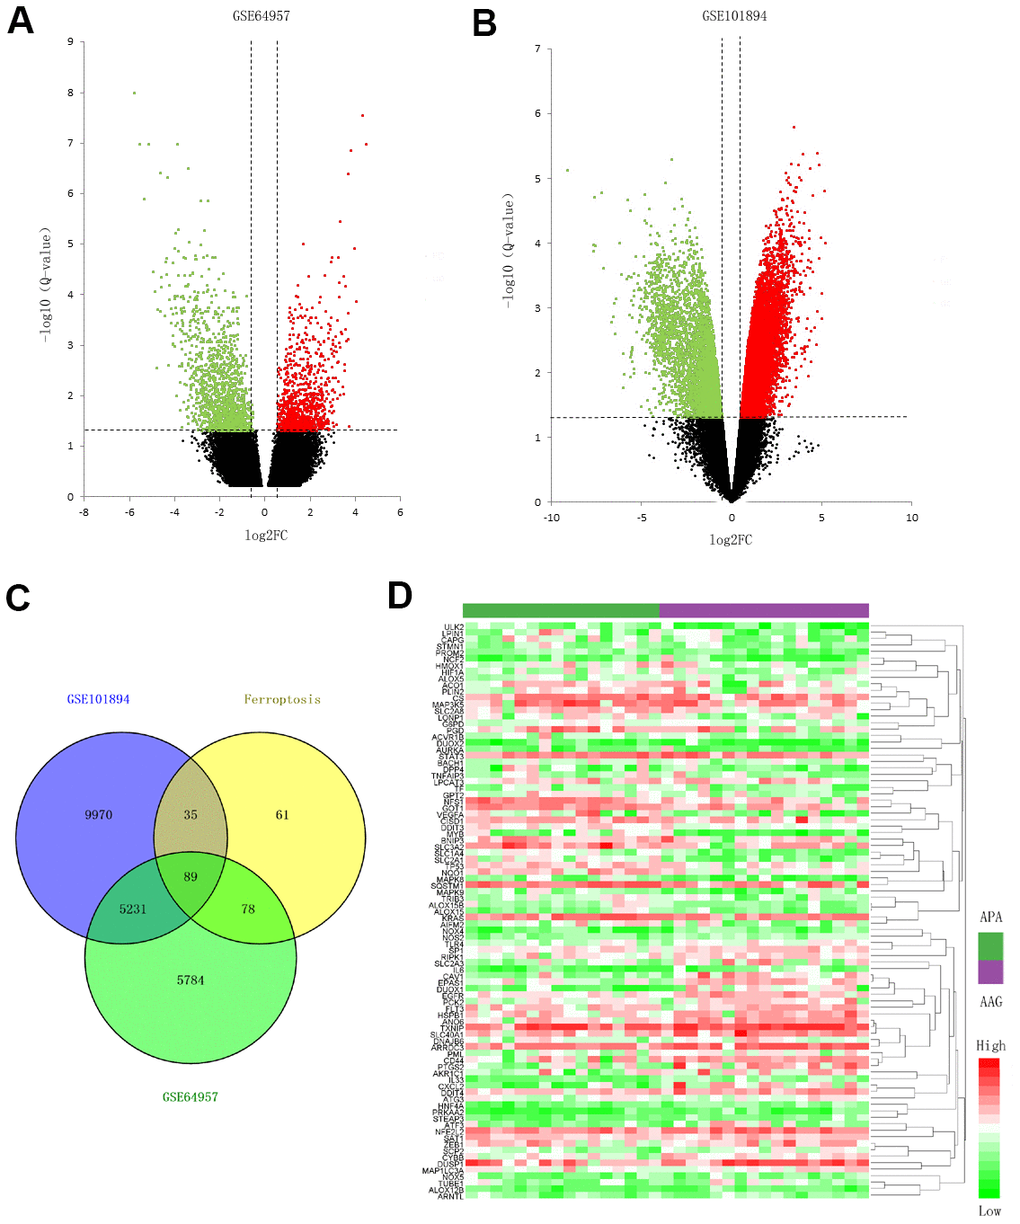 Screening for the ferroptosis-related DEGs. (A, B) Volcano plots of the DEGs in GSE64957 and GSE101894 between APA and AAG tissue. The red dots represent the upregulated genes, the green dots represent the downregulated genes, and the black dots represent genes with no significant difference. (C) Venn diagram to identify ferroptosis-related DEGs. (D) Expression heatmap of 89 ferroptosis-related DEGs in APA and AAG tissue.